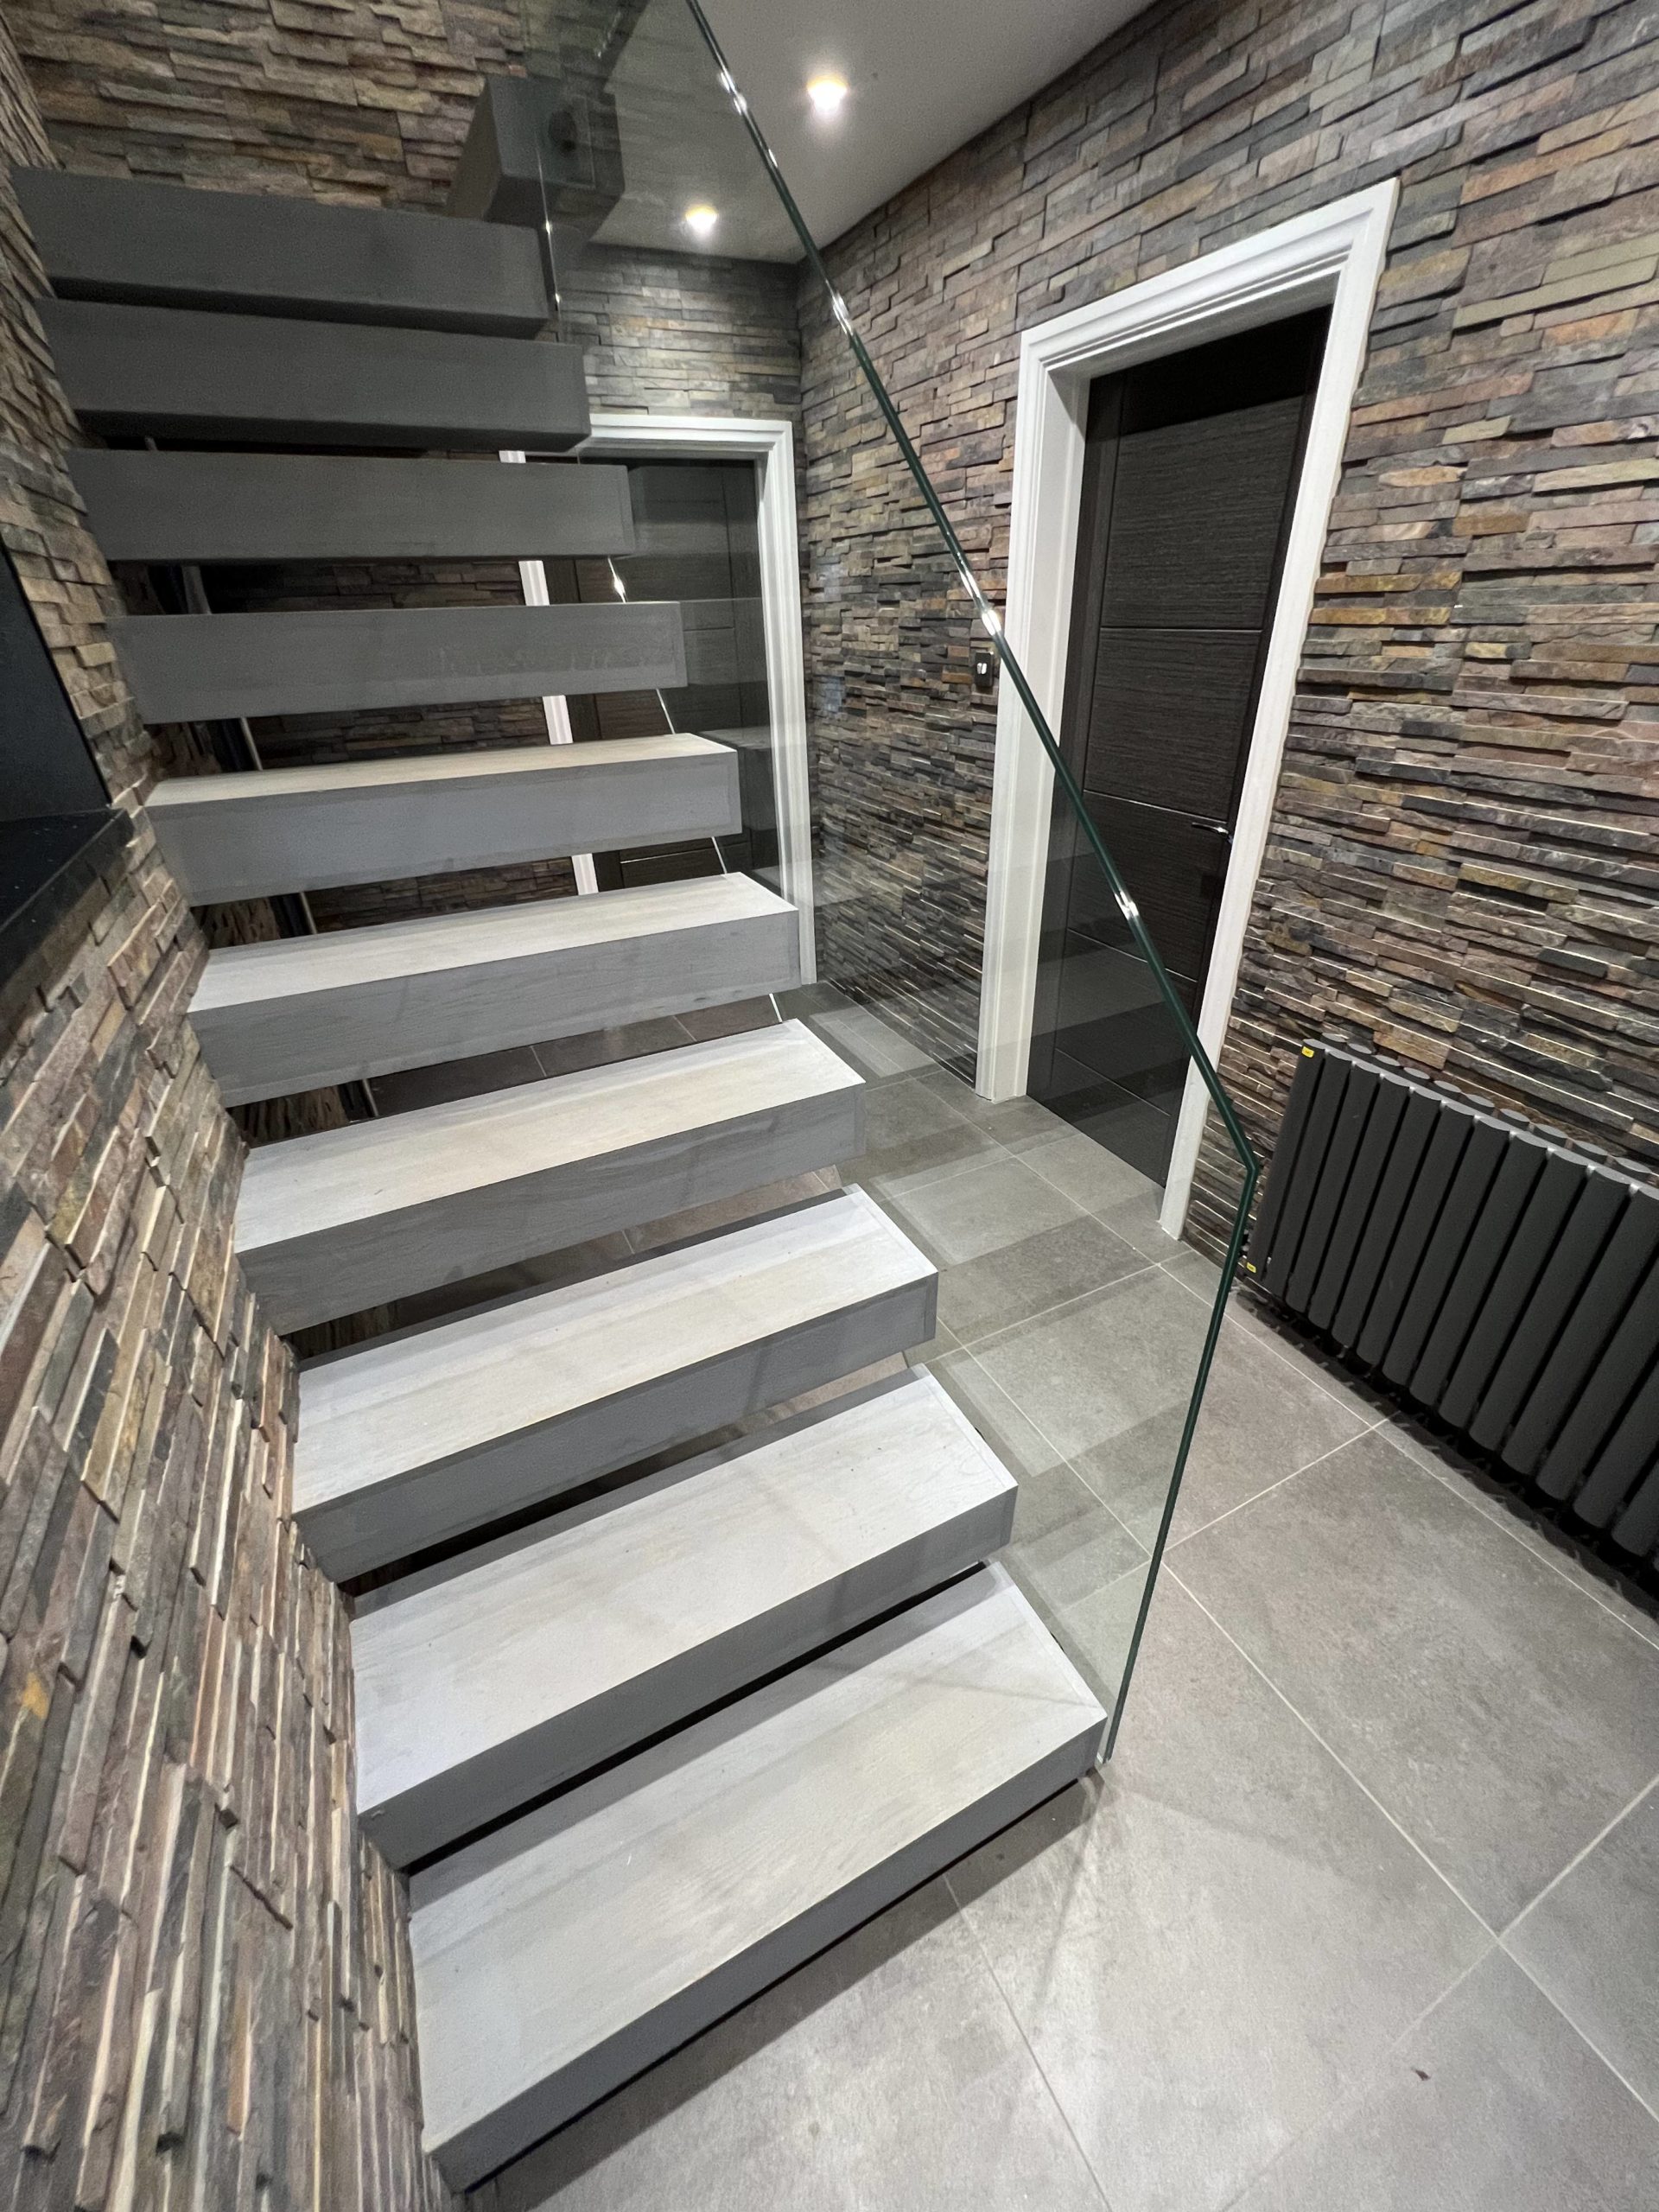 Floating staircase with glass balustrades